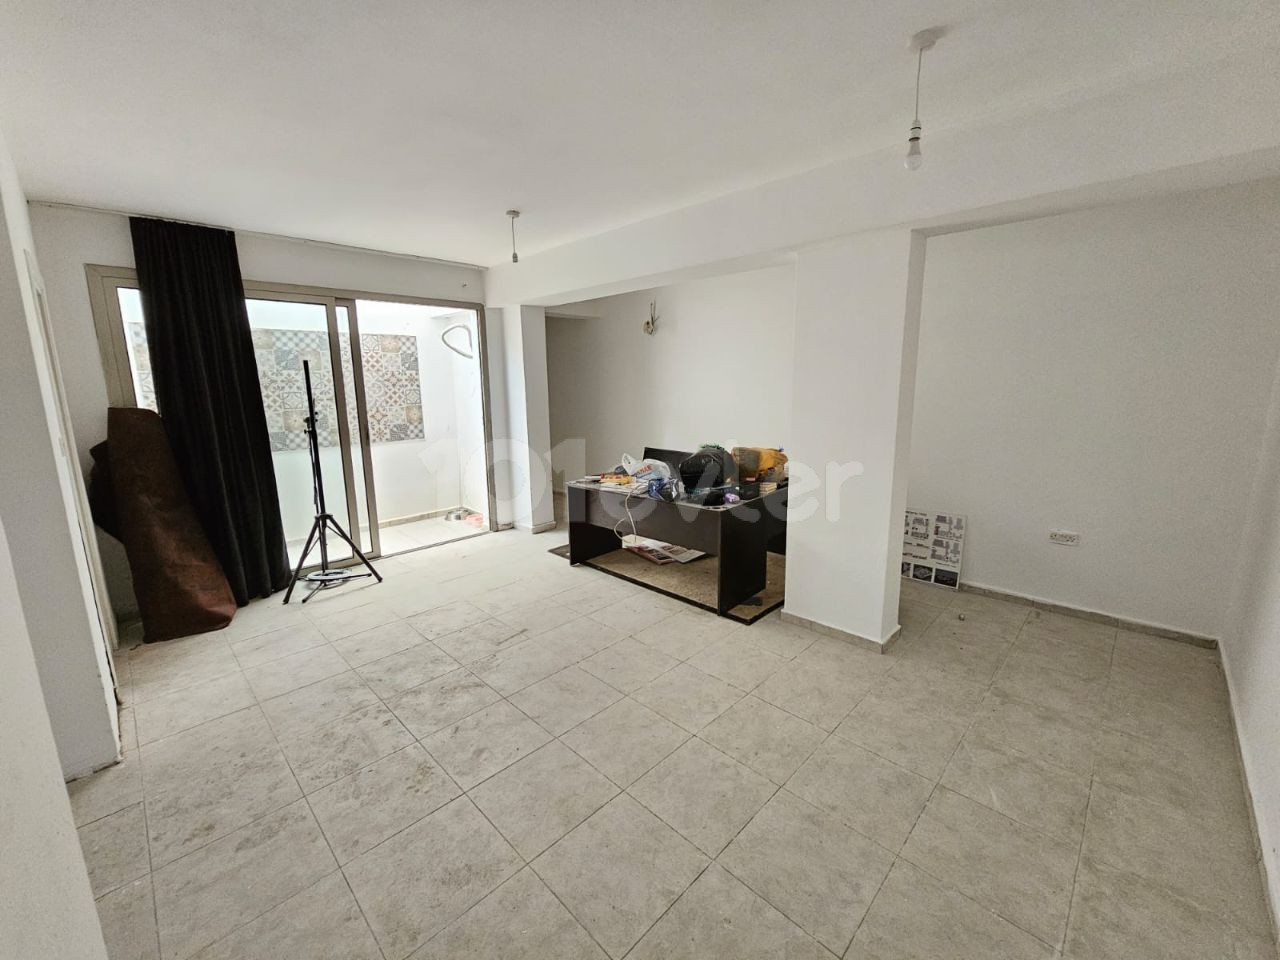 COMPLETE BUILDING CONSISTING OF 1+1 AND 3+1 FLATS FOR SALE IN GİRNE/ÇATALKÖY